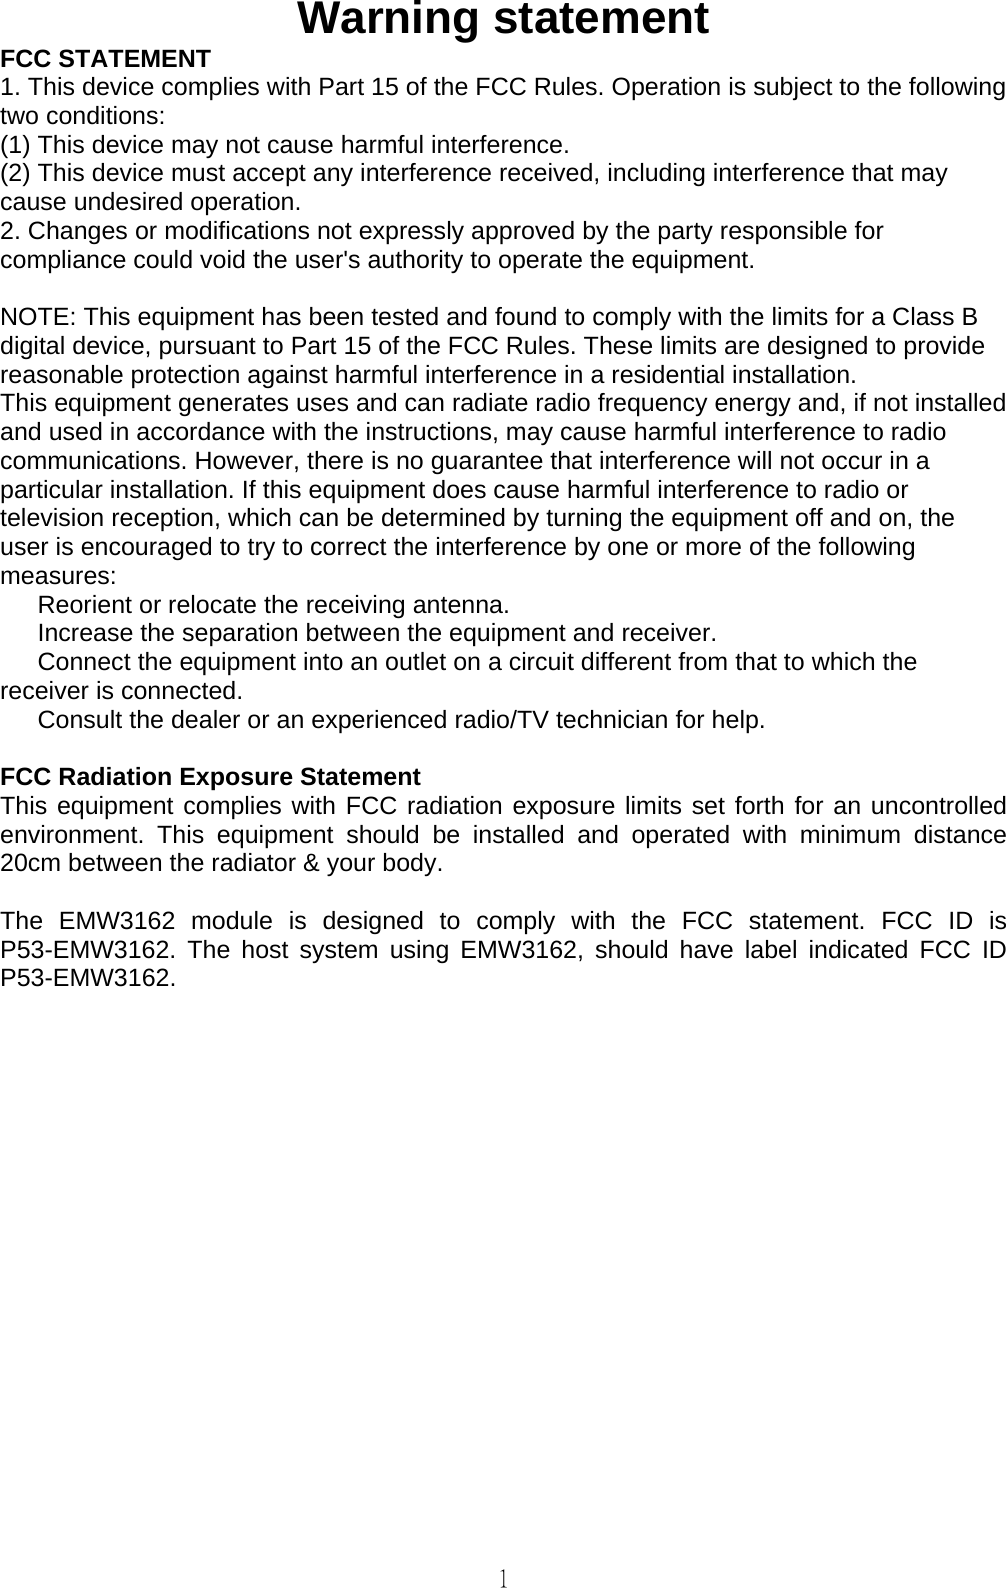   1 Warning statement FCC STATEMENT   1. This device complies with Part 15 of the FCC Rules. Operation is subject to the following two conditions:   (1) This device may not cause harmful interference.   (2) This device must accept any interference received, including interference that may cause undesired operation.   2. Changes or modifications not expressly approved by the party responsible for compliance could void the user&apos;s authority to operate the equipment.    NOTE: This equipment has been tested and found to comply with the limits for a Class B digital device, pursuant to Part 15 of the FCC Rules. These limits are designed to provide reasonable protection against harmful interference in a residential installation.   This equipment generates uses and can radiate radio frequency energy and, if not installed and used in accordance with the instructions, may cause harmful interference to radio communications. However, there is no guarantee that interference will not occur in a particular installation. If this equipment does cause harmful interference to radio or television reception, which can be determined by turning the equipment off and on, the user is encouraged to try to correct the interference by one or more of the following measures:    Reorient or relocate the receiving antenna.      Increase the separation between the equipment and receiver.      Connect the equipment into an outlet on a circuit different from that to which the receiver is connected.      Consult the dealer or an experienced radio/TV technician for help.    FCC Radiation Exposure Statement   This equipment complies with FCC radiation exposure limits set forth for an uncontrolled environment. This equipment should be installed and operated with minimum distance 20cm between the radiator &amp; your body.    The EMW3162 module is designed to comply with the FCC statement. FCC ID is P53-EMW3162. The host system using EMW3162, should have label indicated FCC ID P53-EMW3162.                 